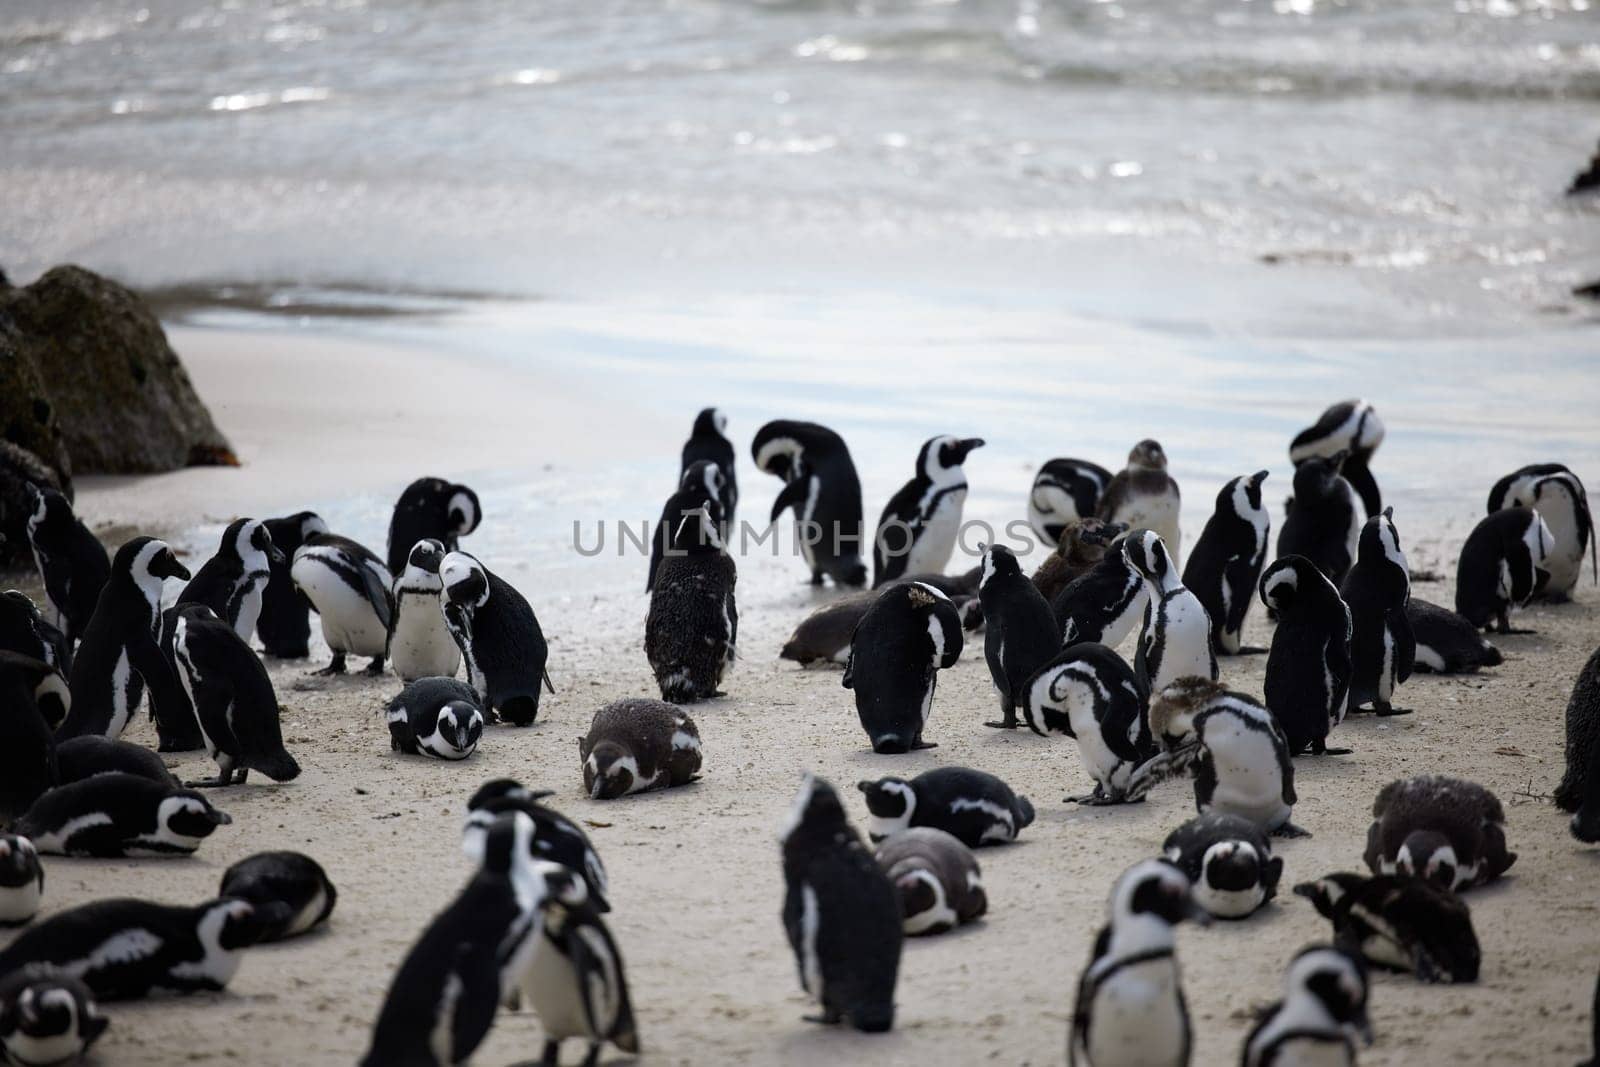 Water, sand and group of penguins at beach for tourism with nature, ecology and marine wildlife. Environment, rock and African penguin by sea with crowd for travel and natural habitat in South Africa.